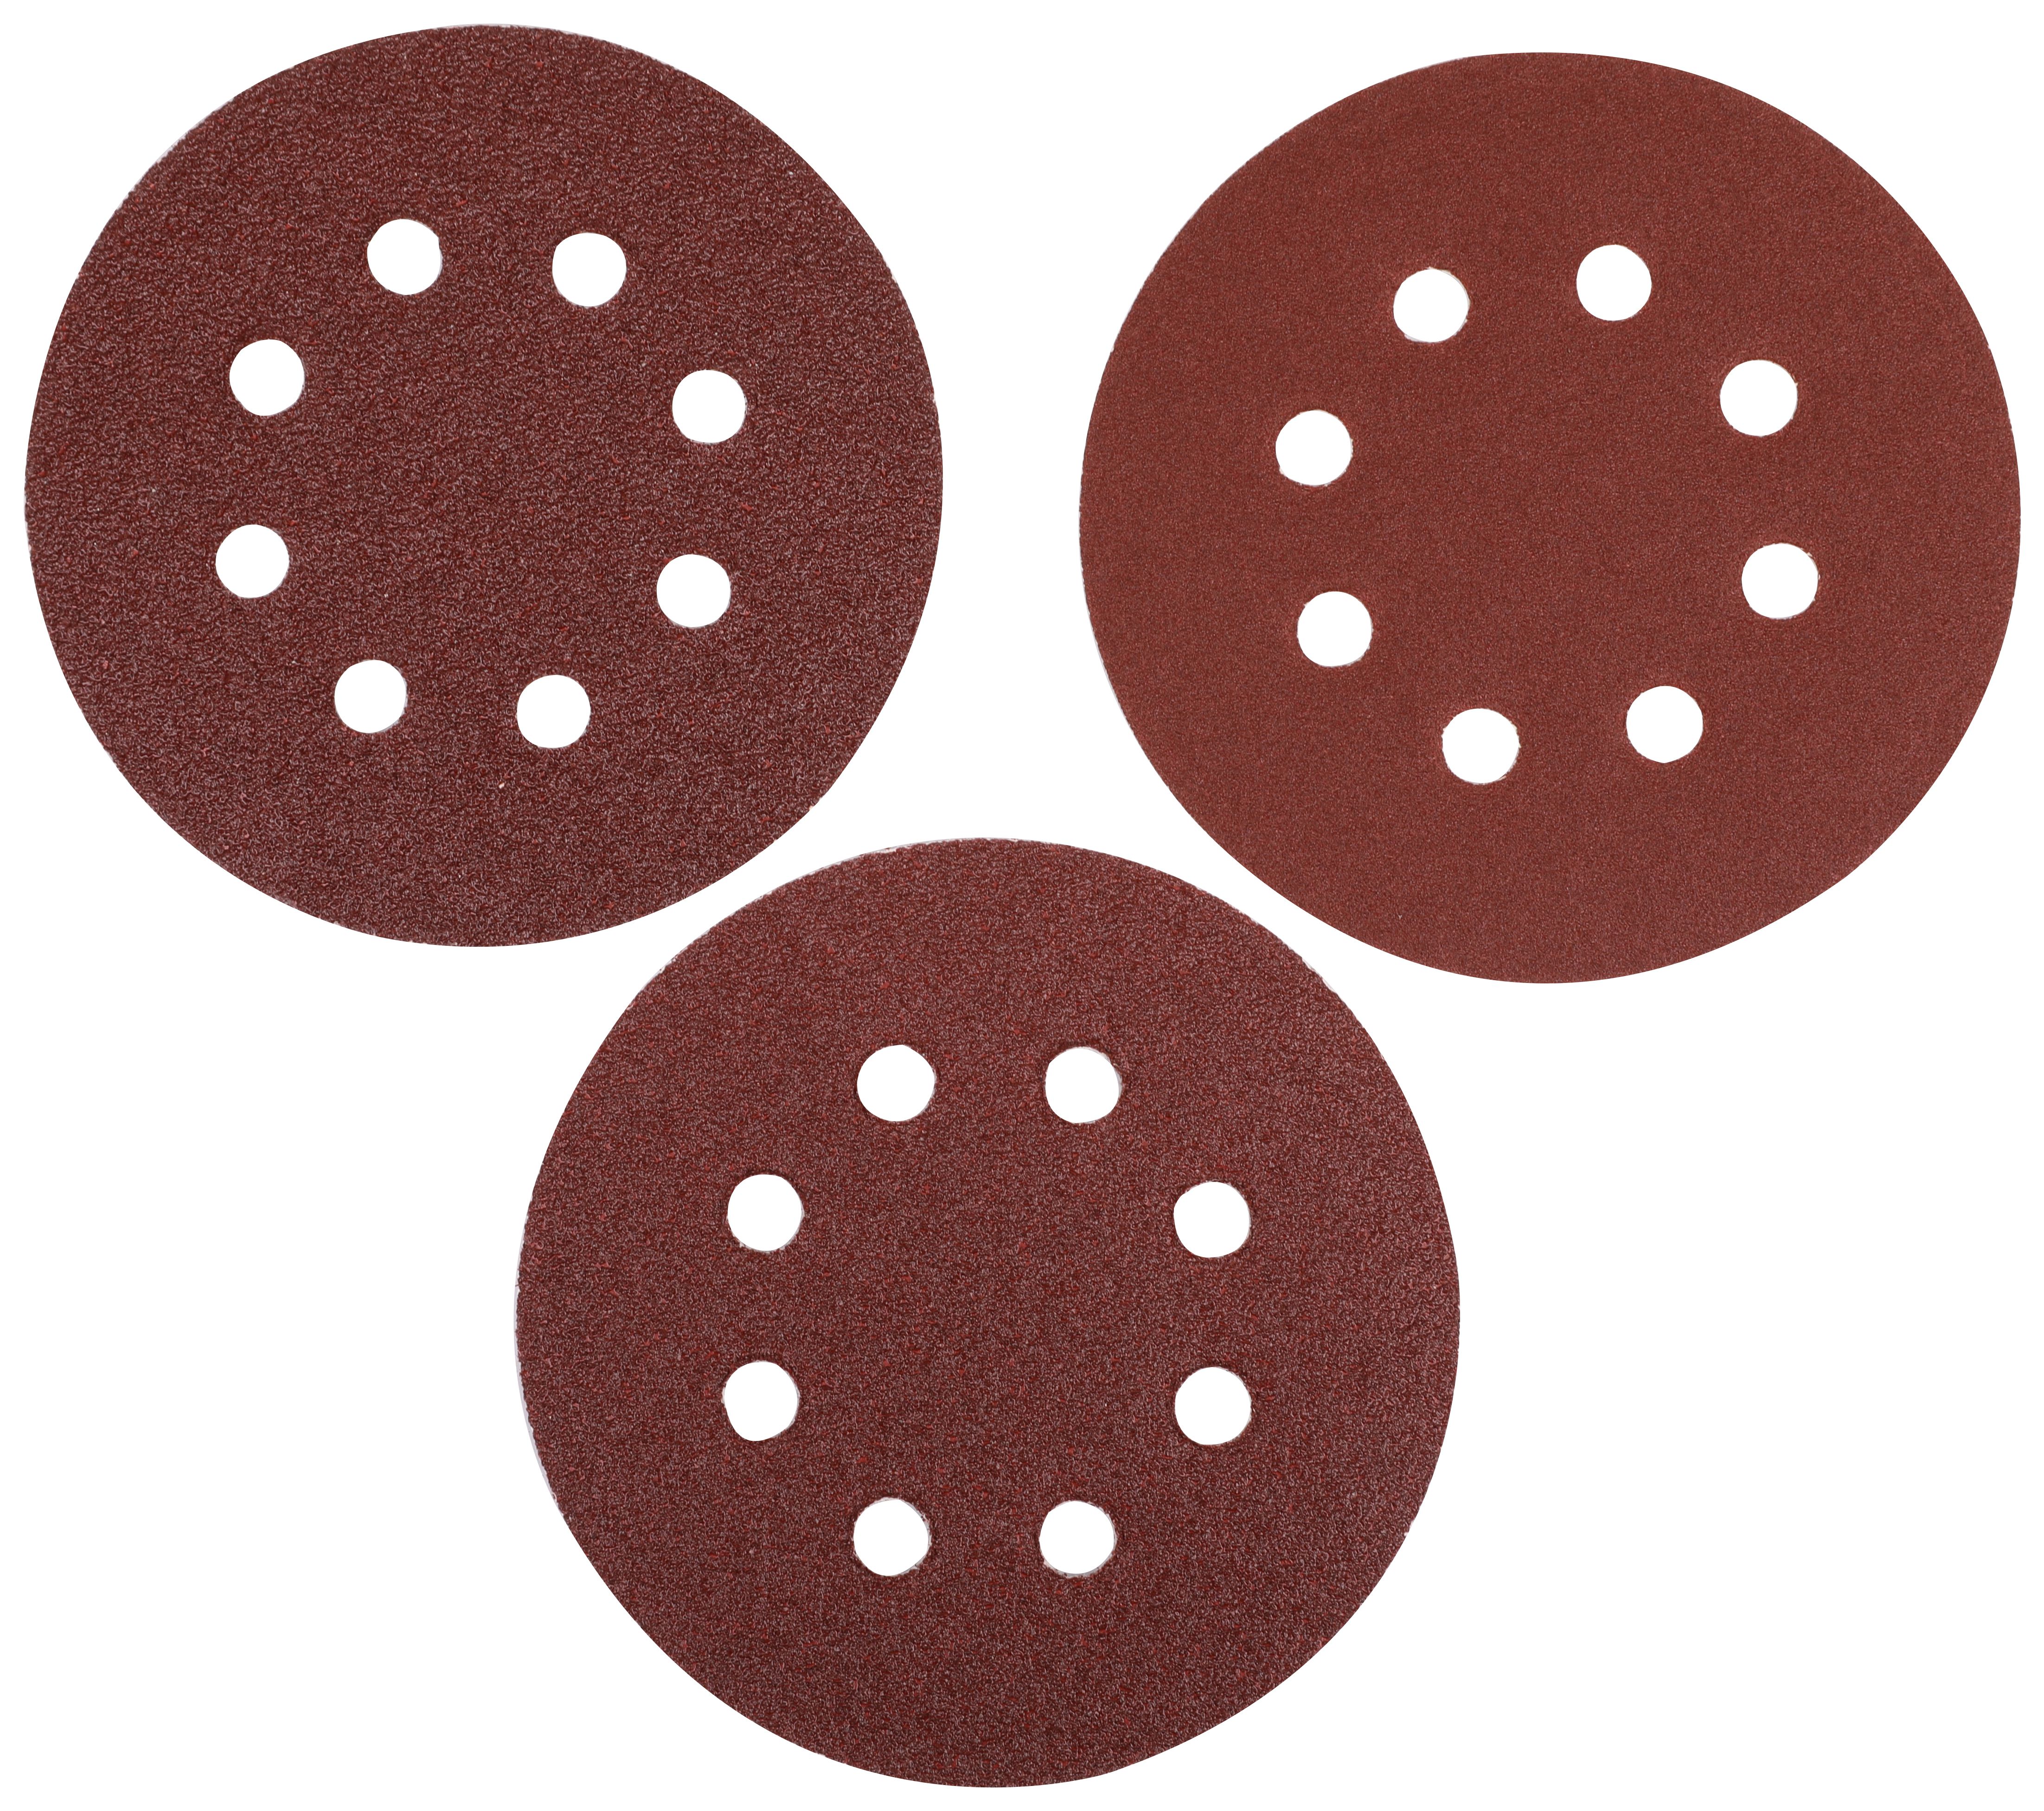 Image of Wickes Assorted Eccentric Sander Discs - Pack of 10